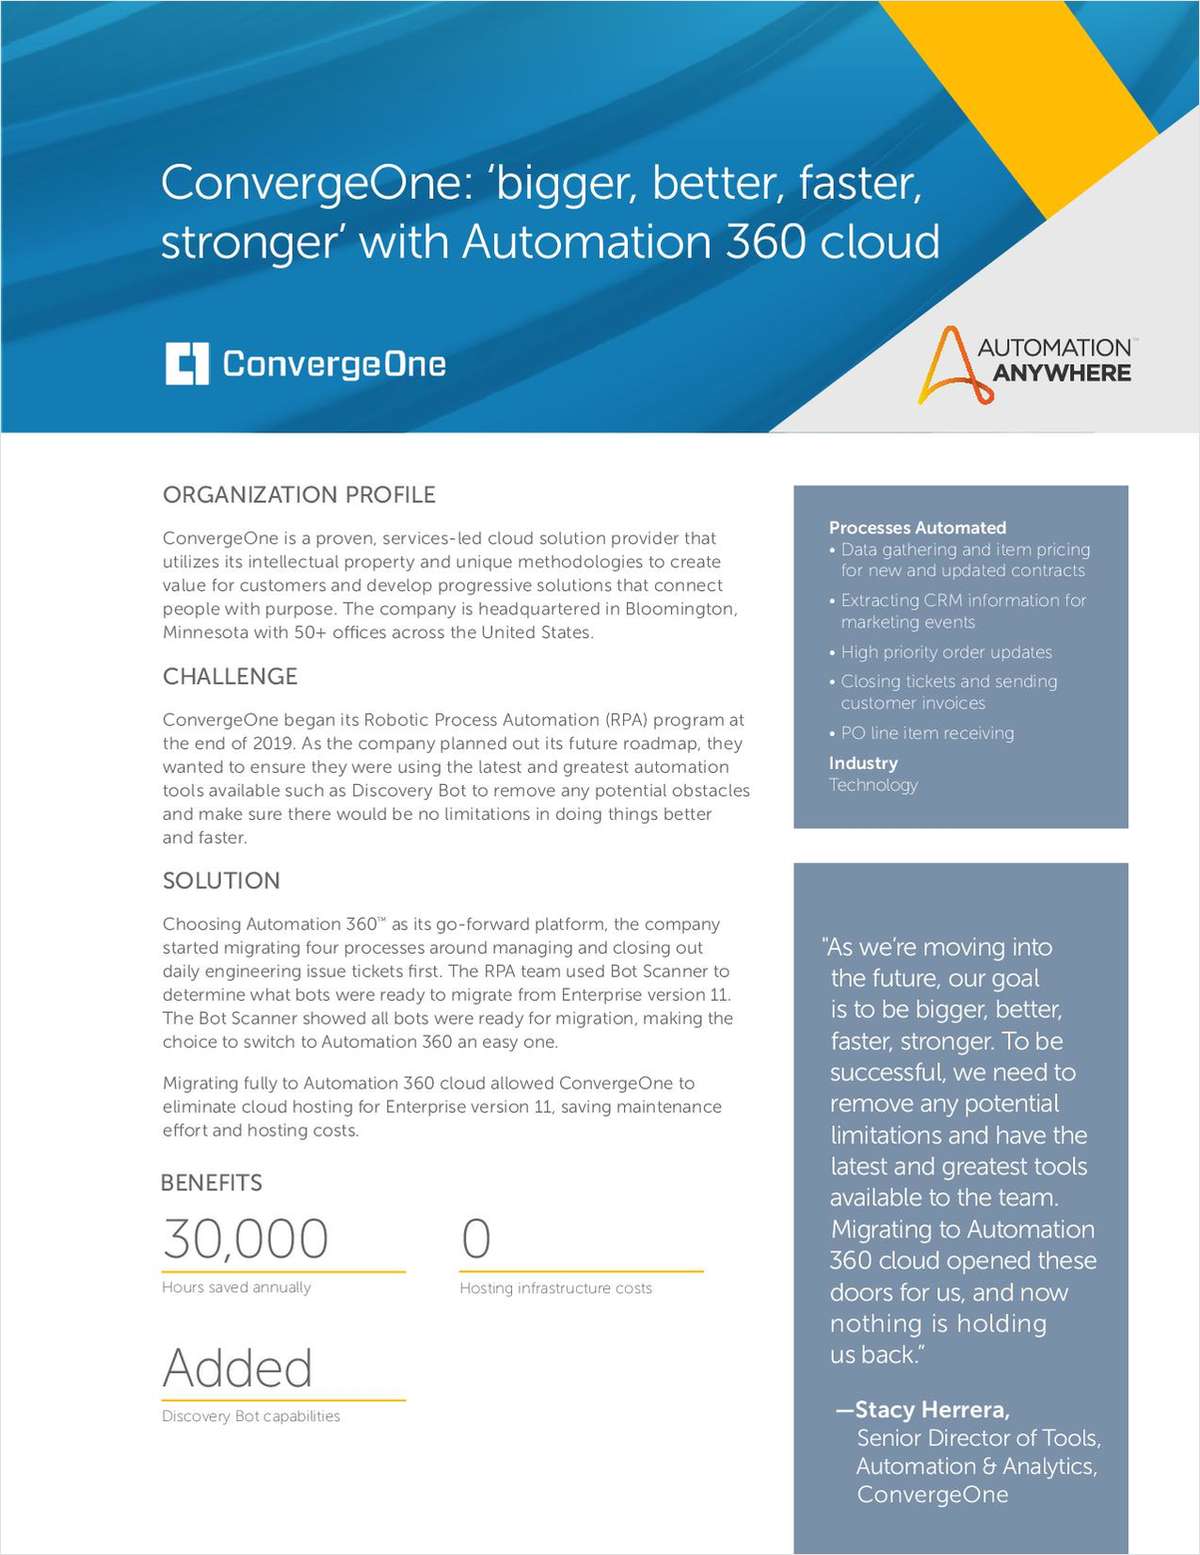 How did ConvergeOne save maintenance effort and hosting costs with Automation 360 cloud migration?